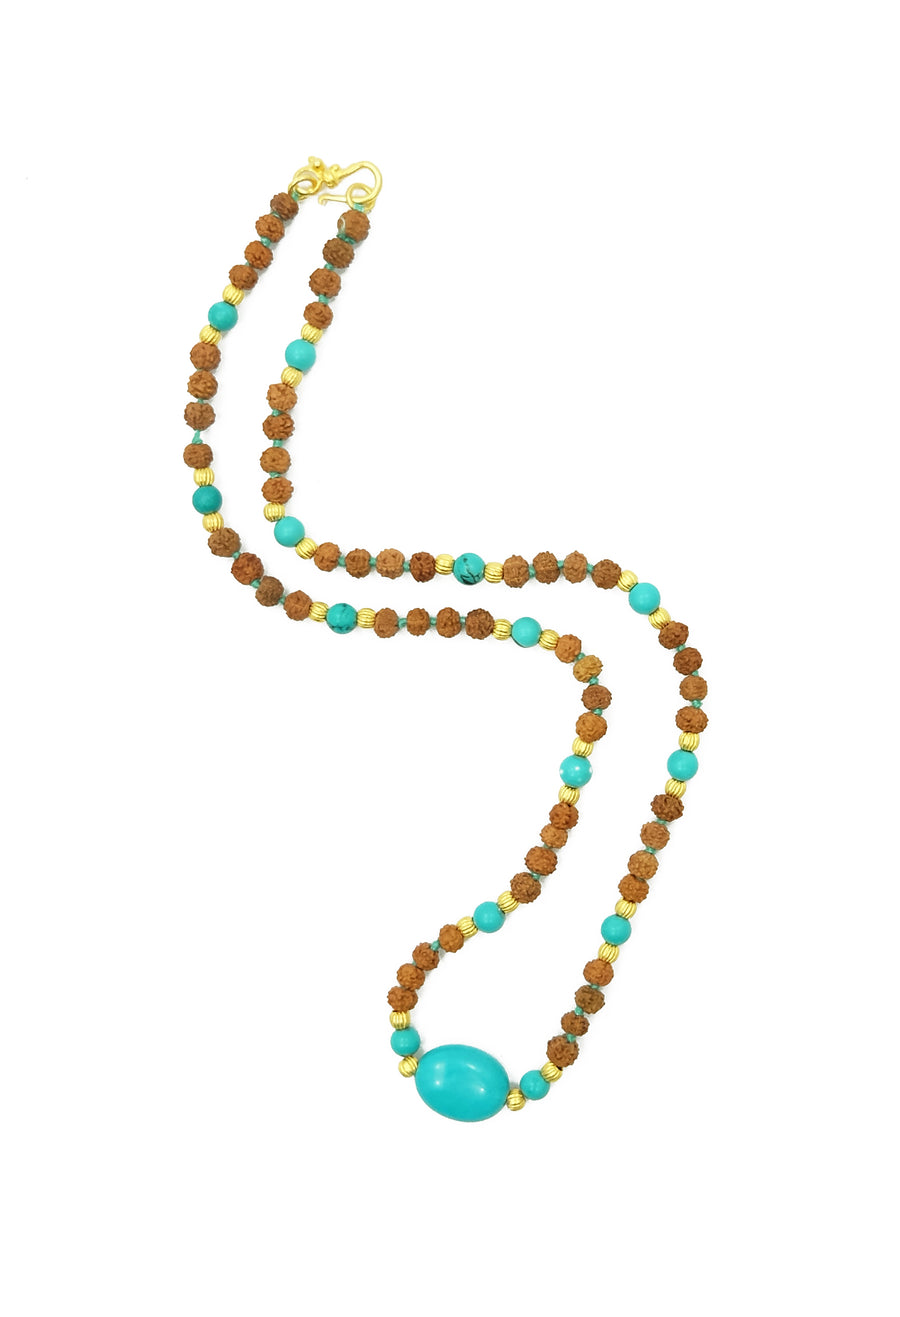 Azure Waves choker length necklace made from rudraksha seeds, turquoise beads and 22k gold accents.